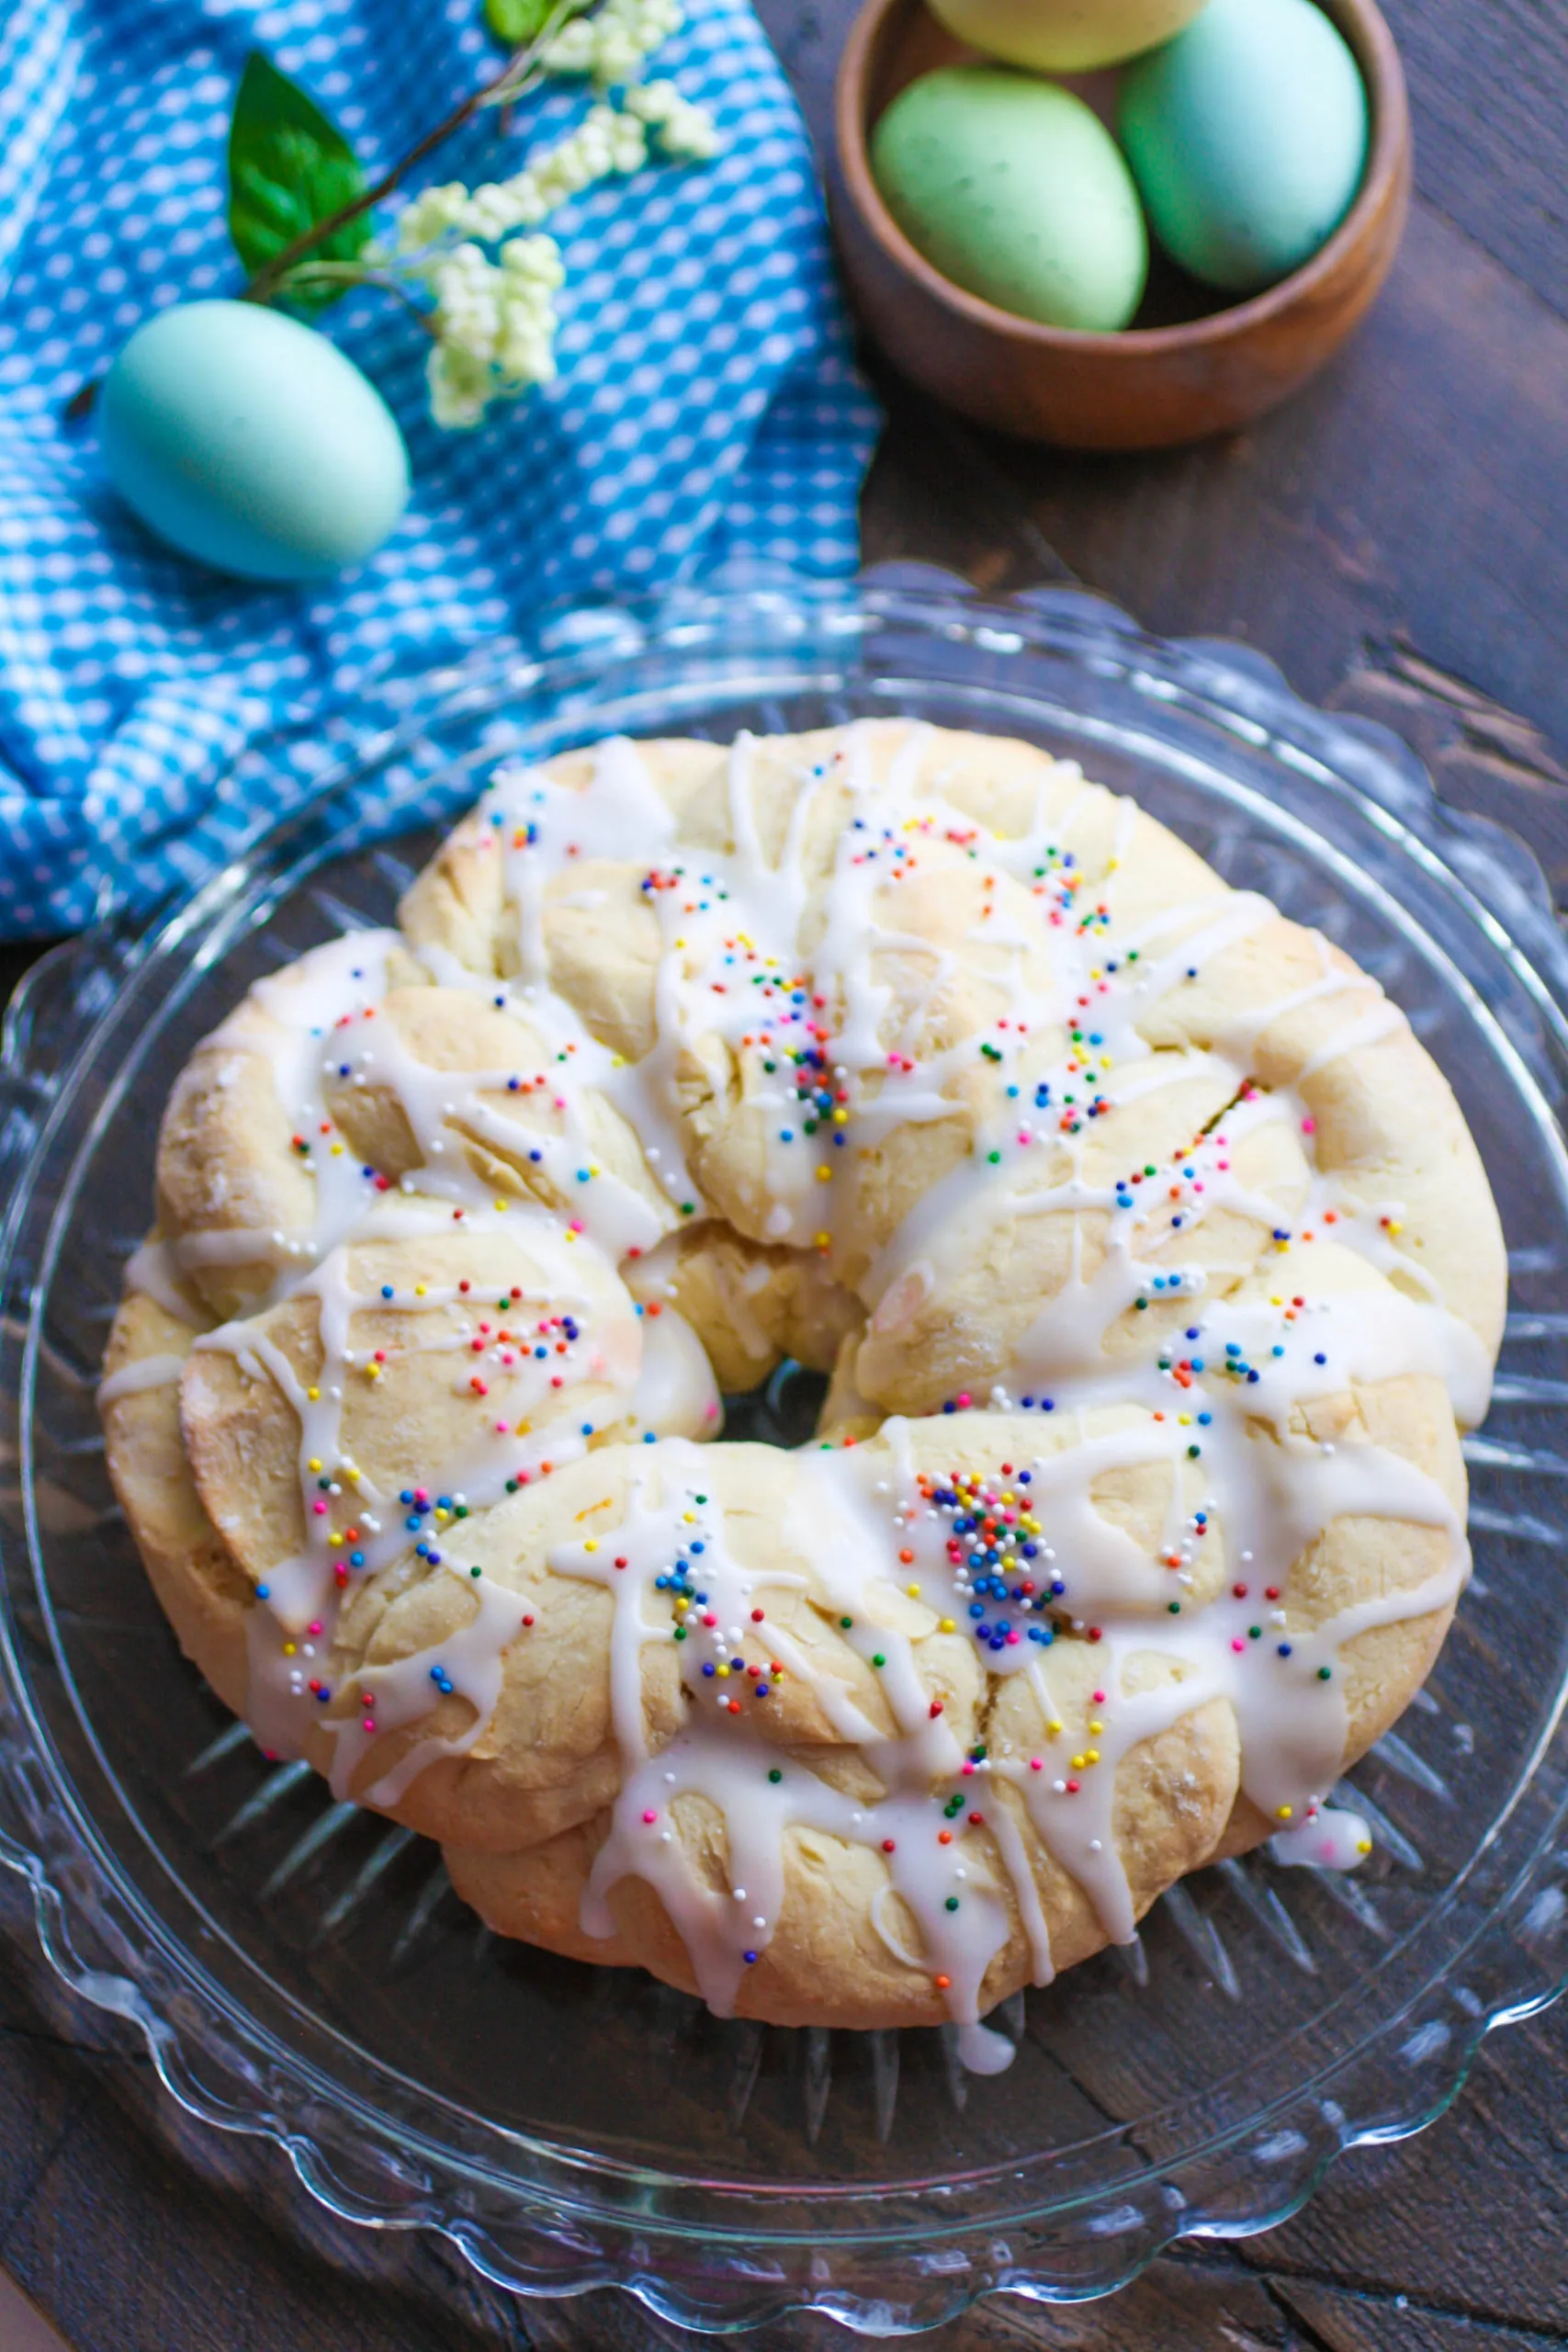 No-Rise Italian Easter Bread is fun and festive for your holiday table.